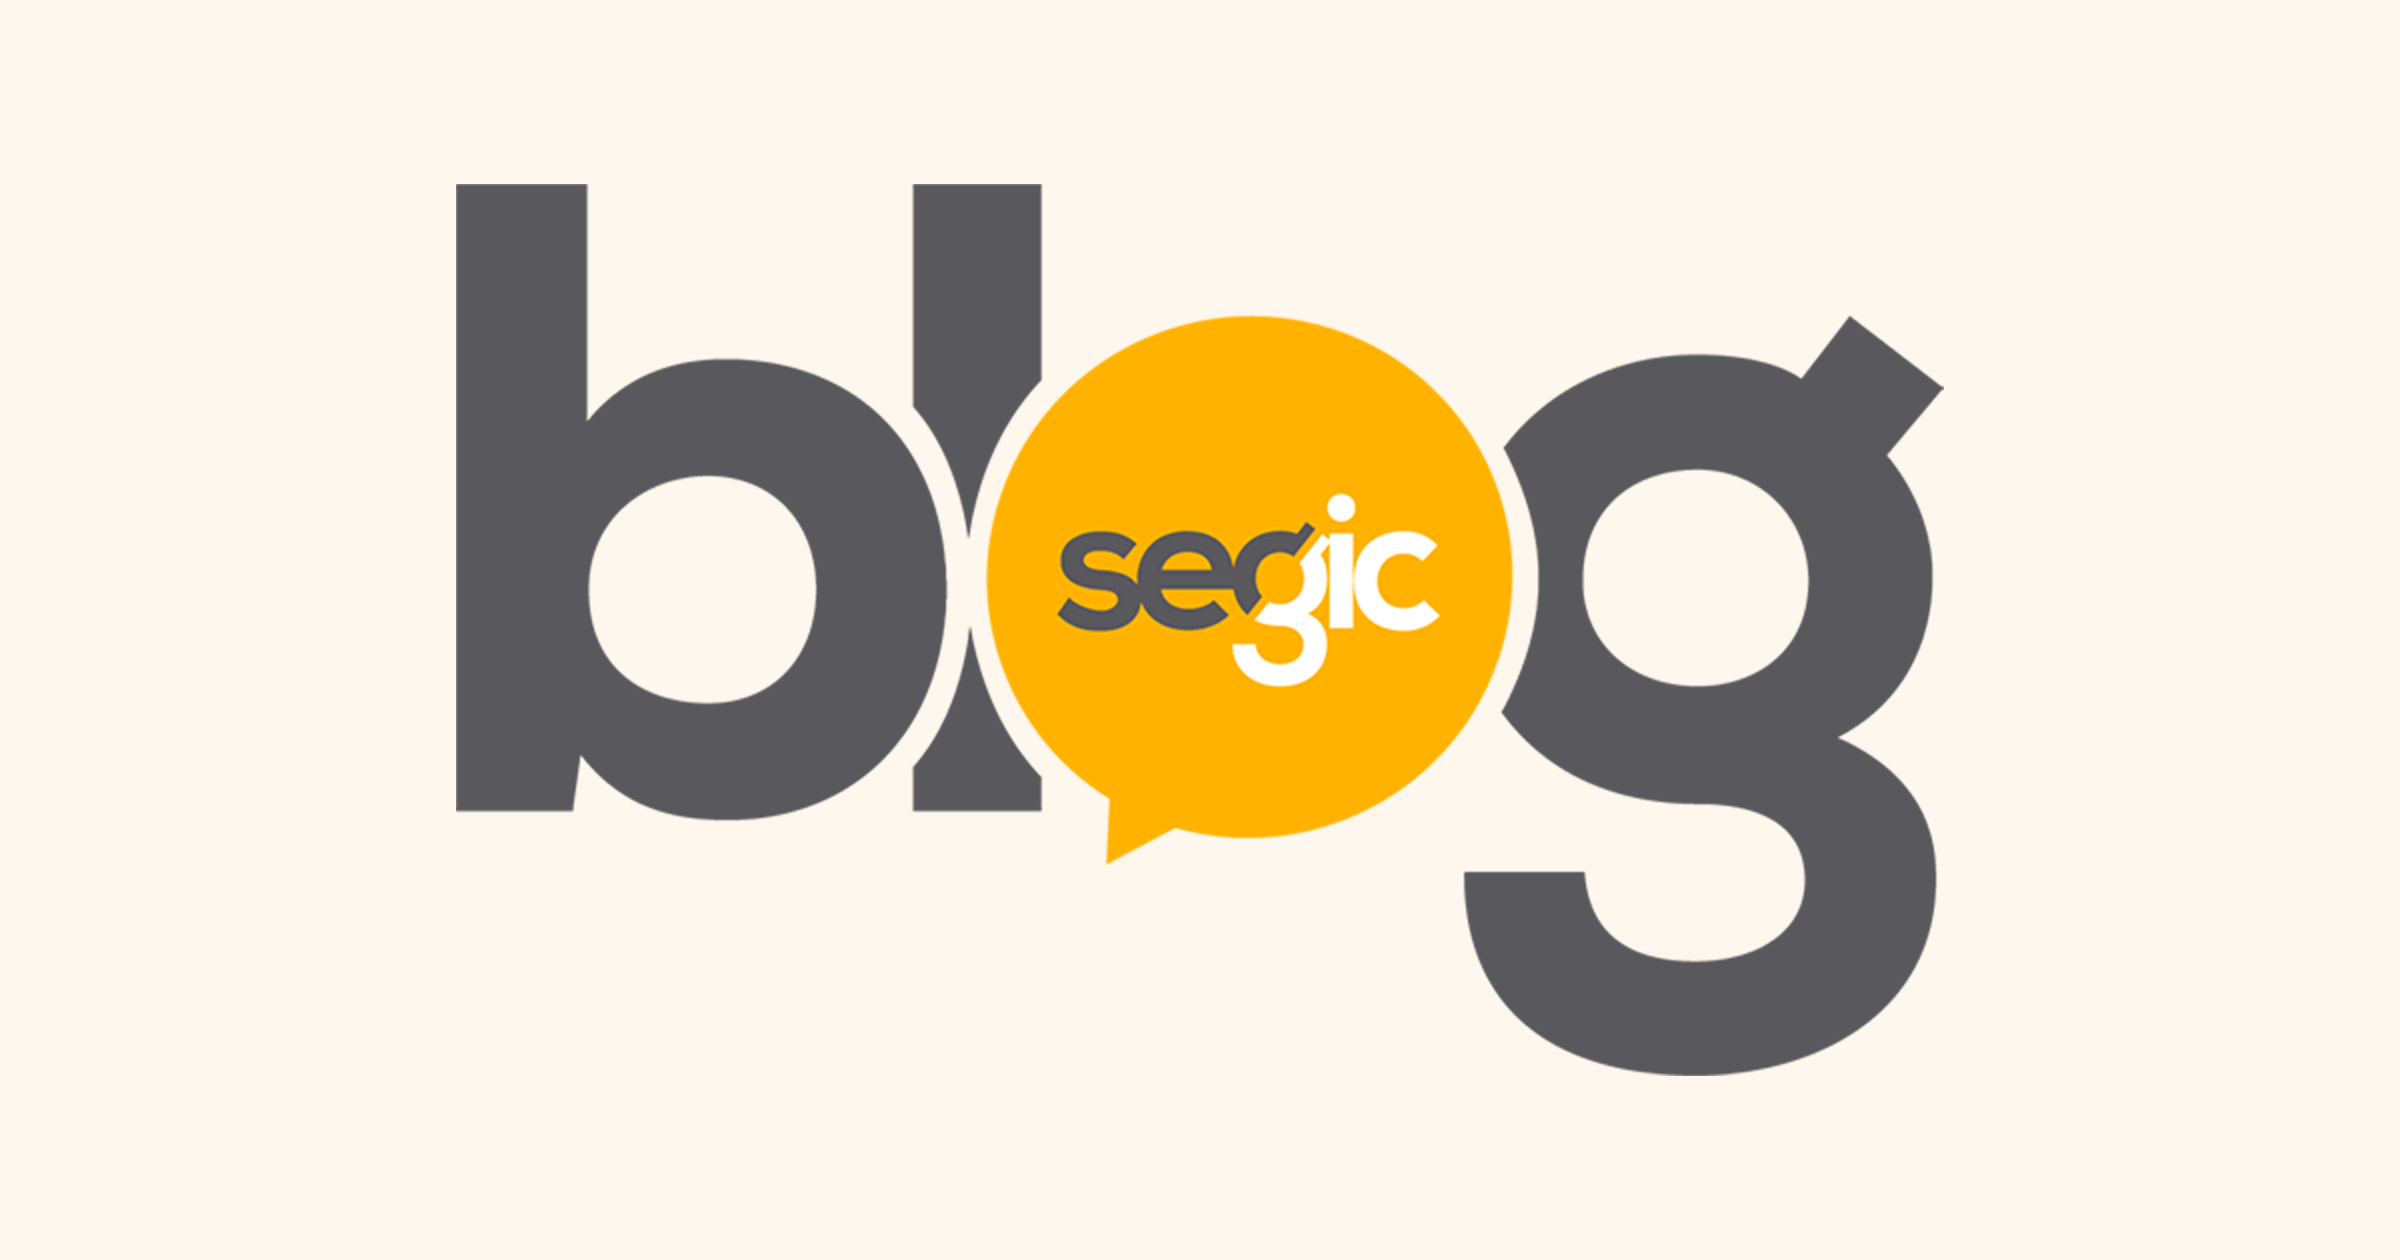 What’s the difference between voluntary and individual benefits in Segic’s Marketplace?